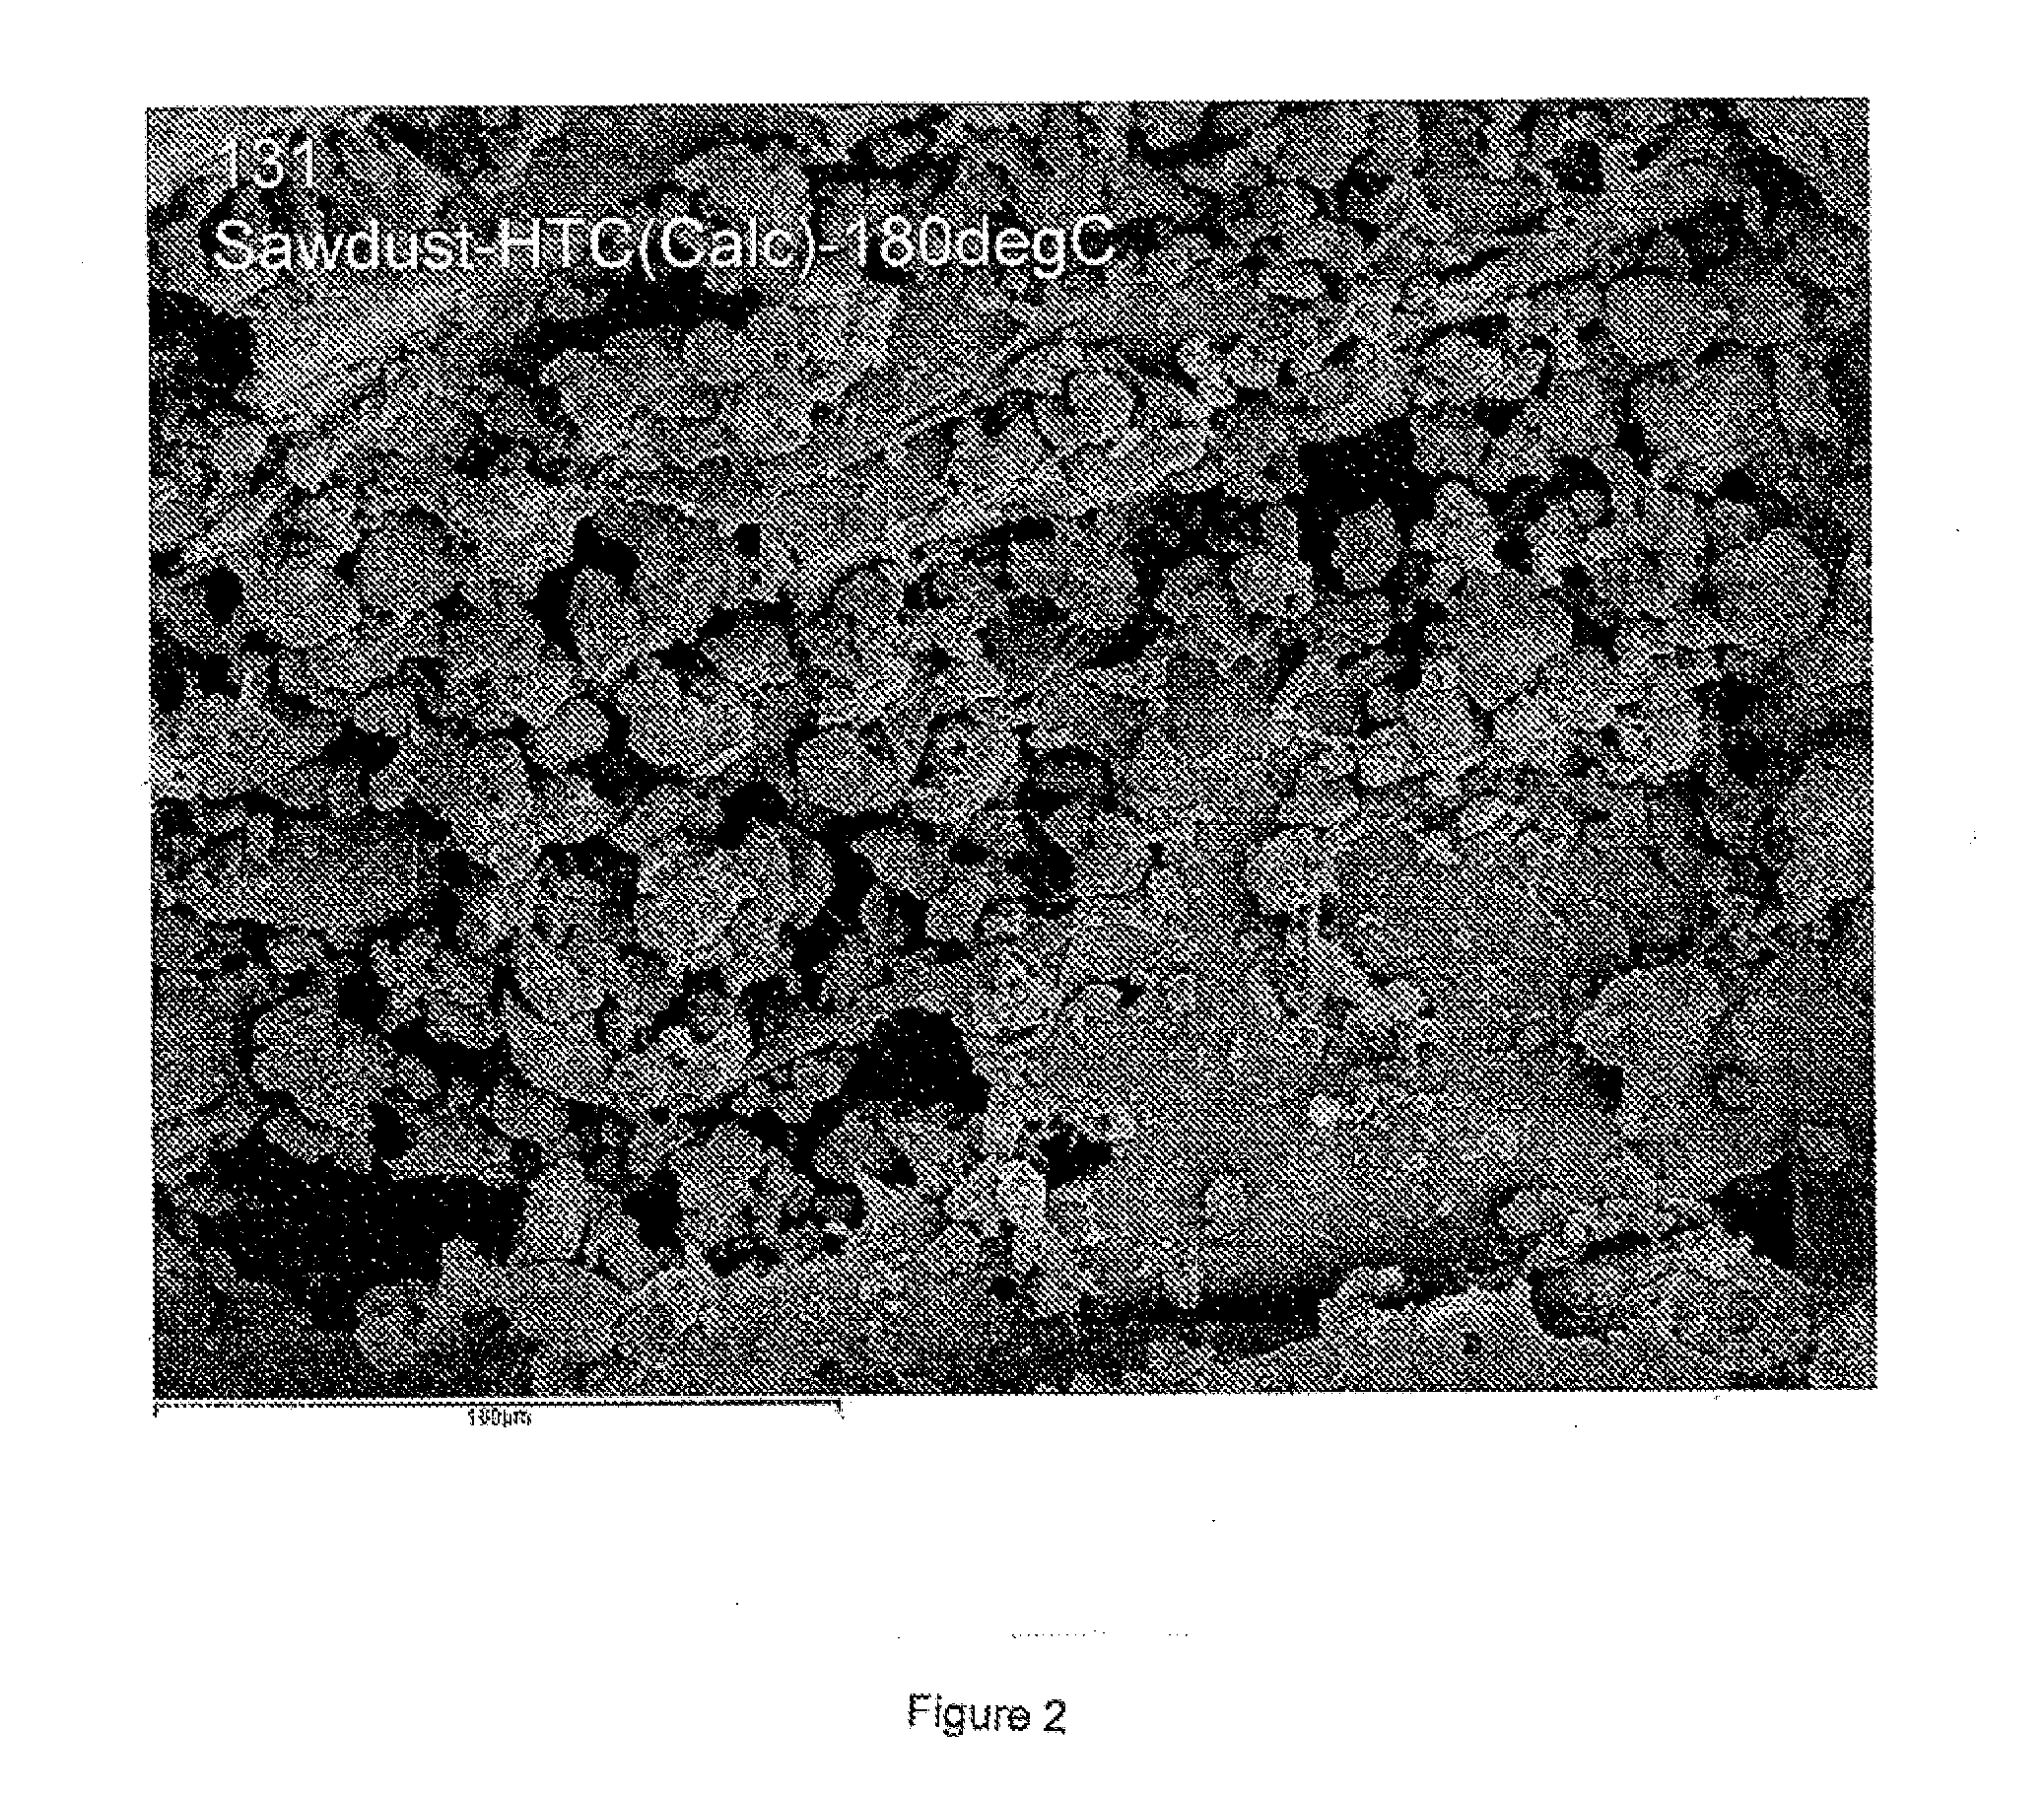 Polymeric material of photosynthetic origin comprising particulate inorganic material